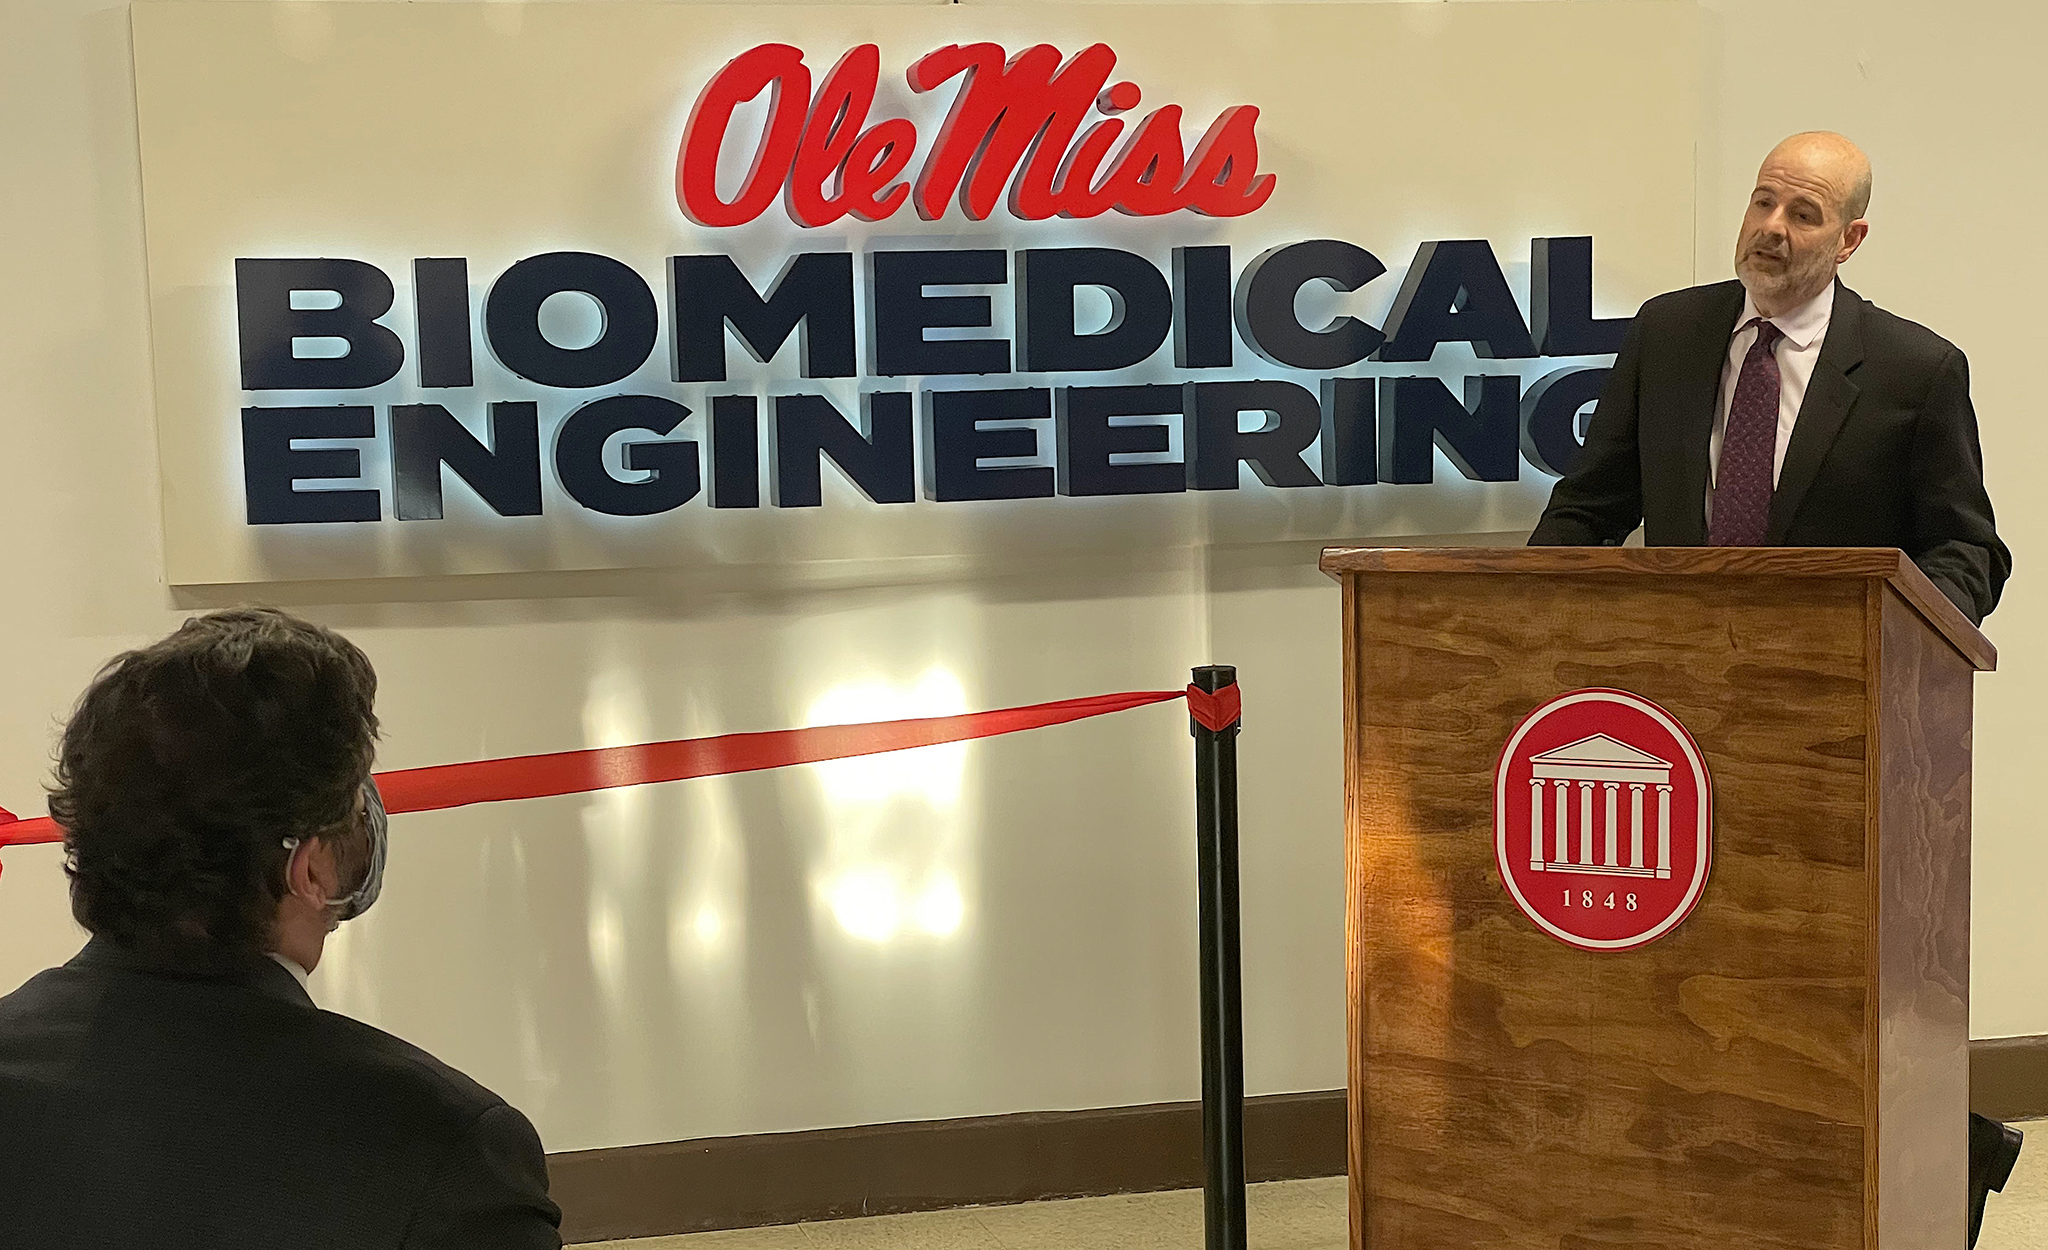 Graduates of the University of Mississippi biomedical engineering program can enter careers in medical device design, biotechnology, pharmaceutical research and sales, biomedical imaging, and telemedicine, among others. Biomedical engineering also provides the skills and knowledge needed to pursue a medical degree.